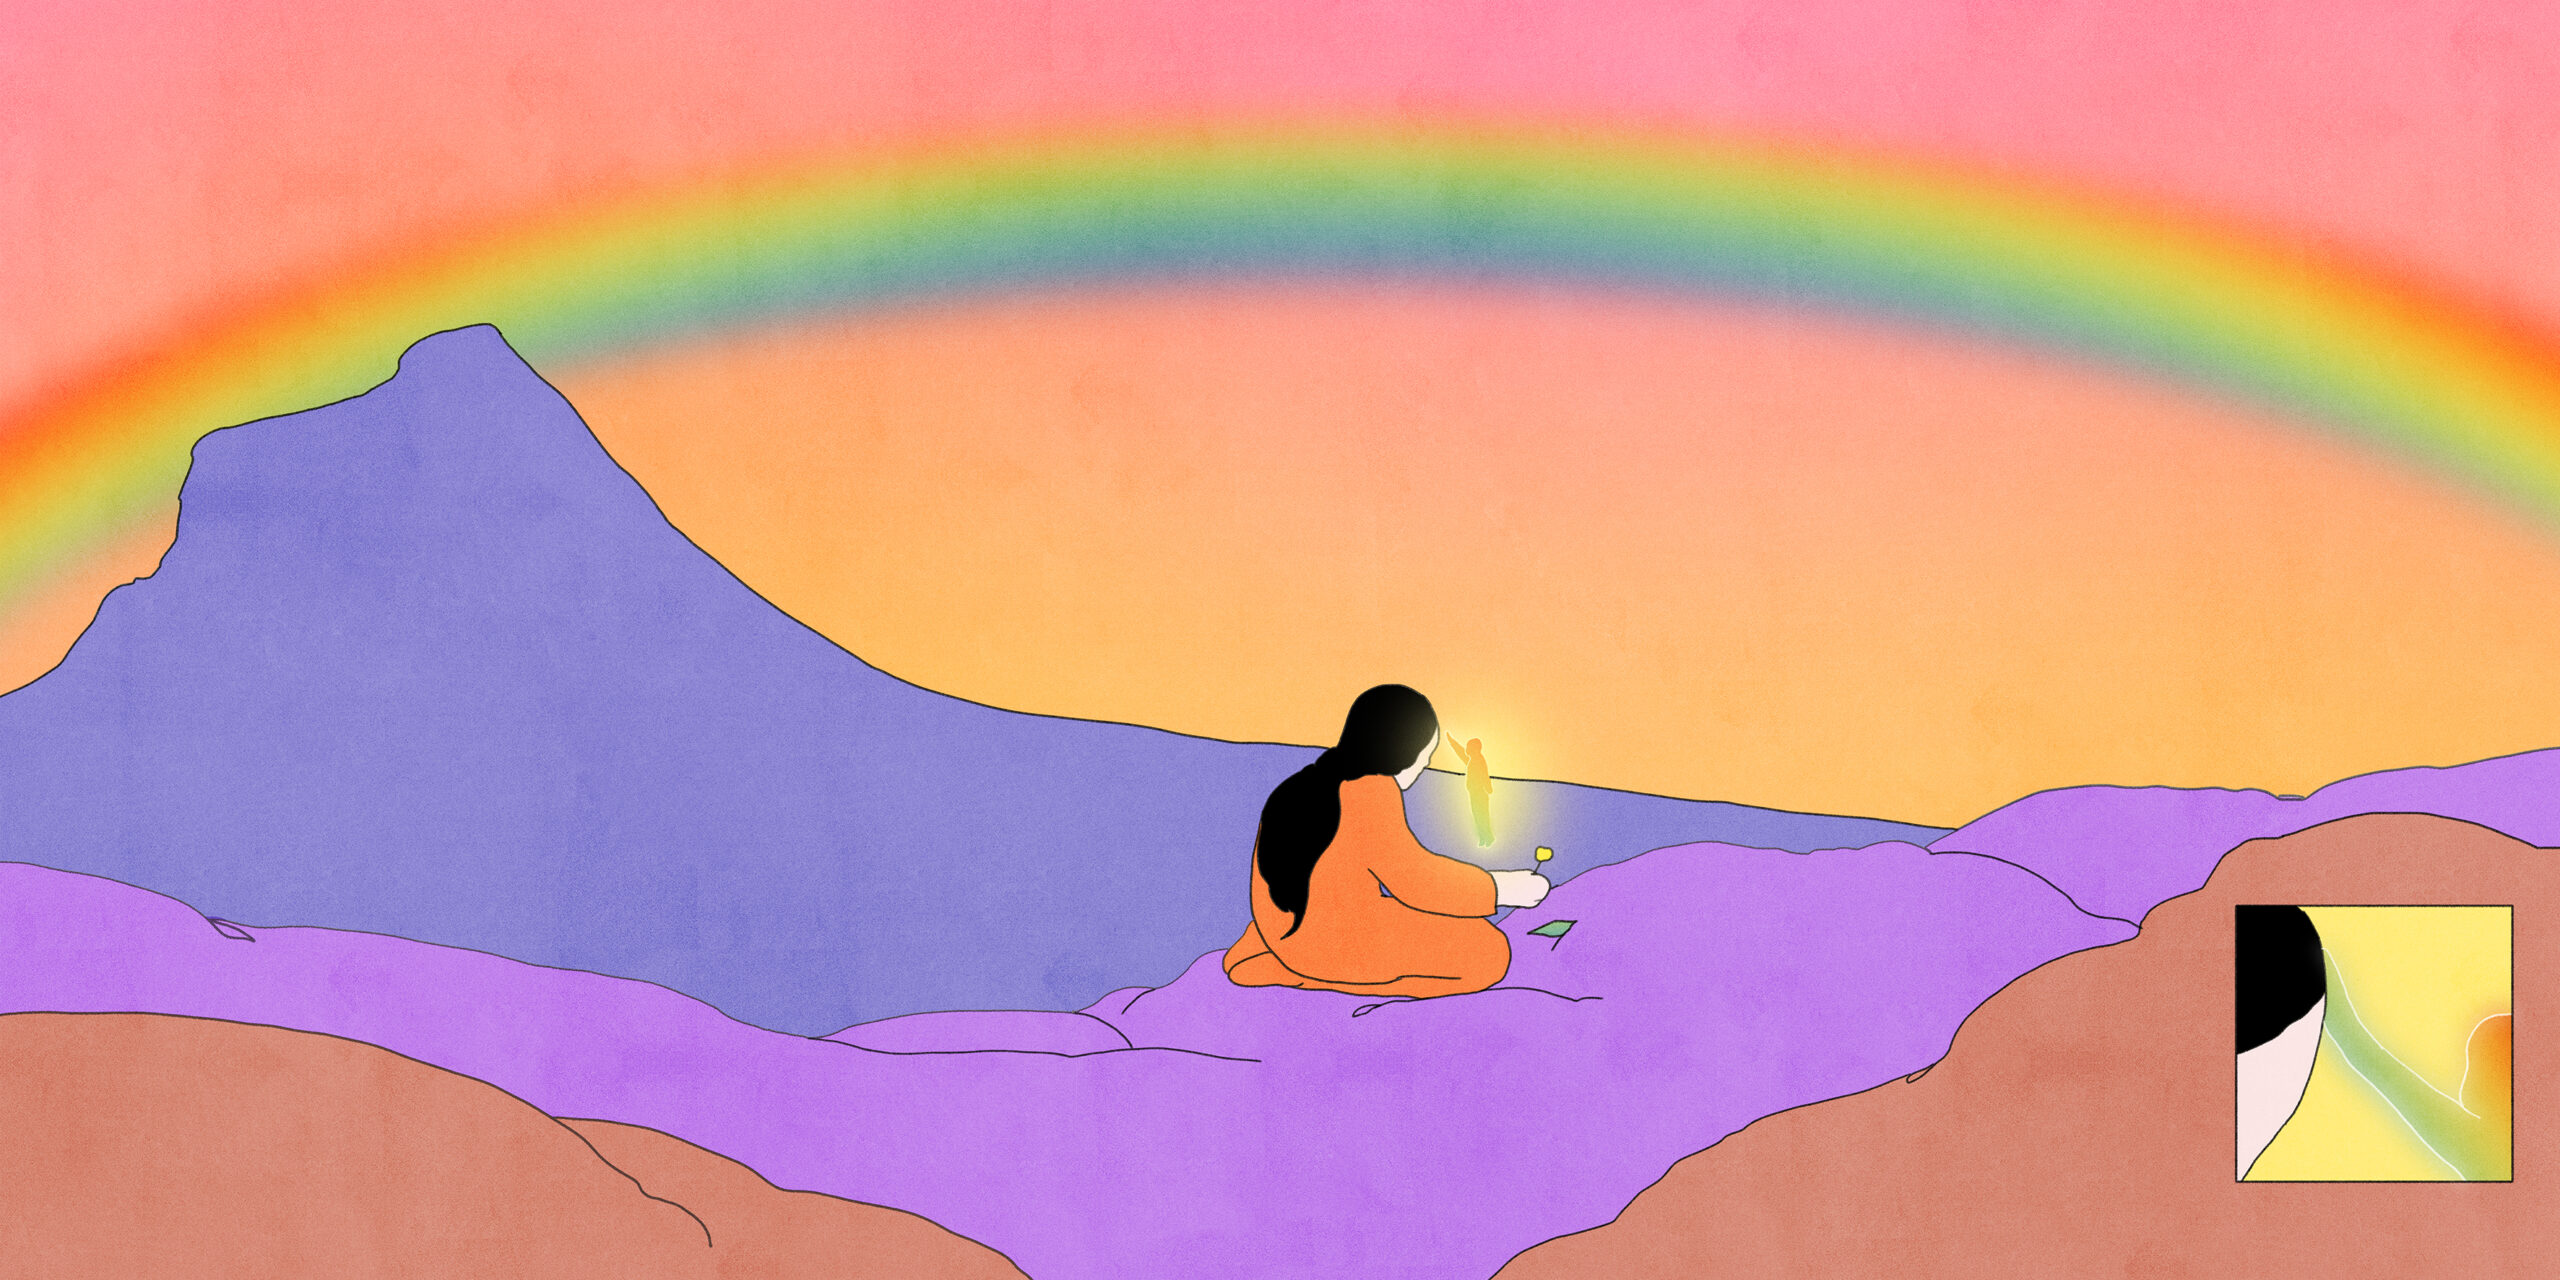 Illustration of a woman kneeling in the middle of a soft, expansive landscape, placing a flower on the ground. There is a rainbow in the sky and a small, glowing figure in front of her. In an insert in the bottom right corner, we can see a close-up of the figure touching her forehead.